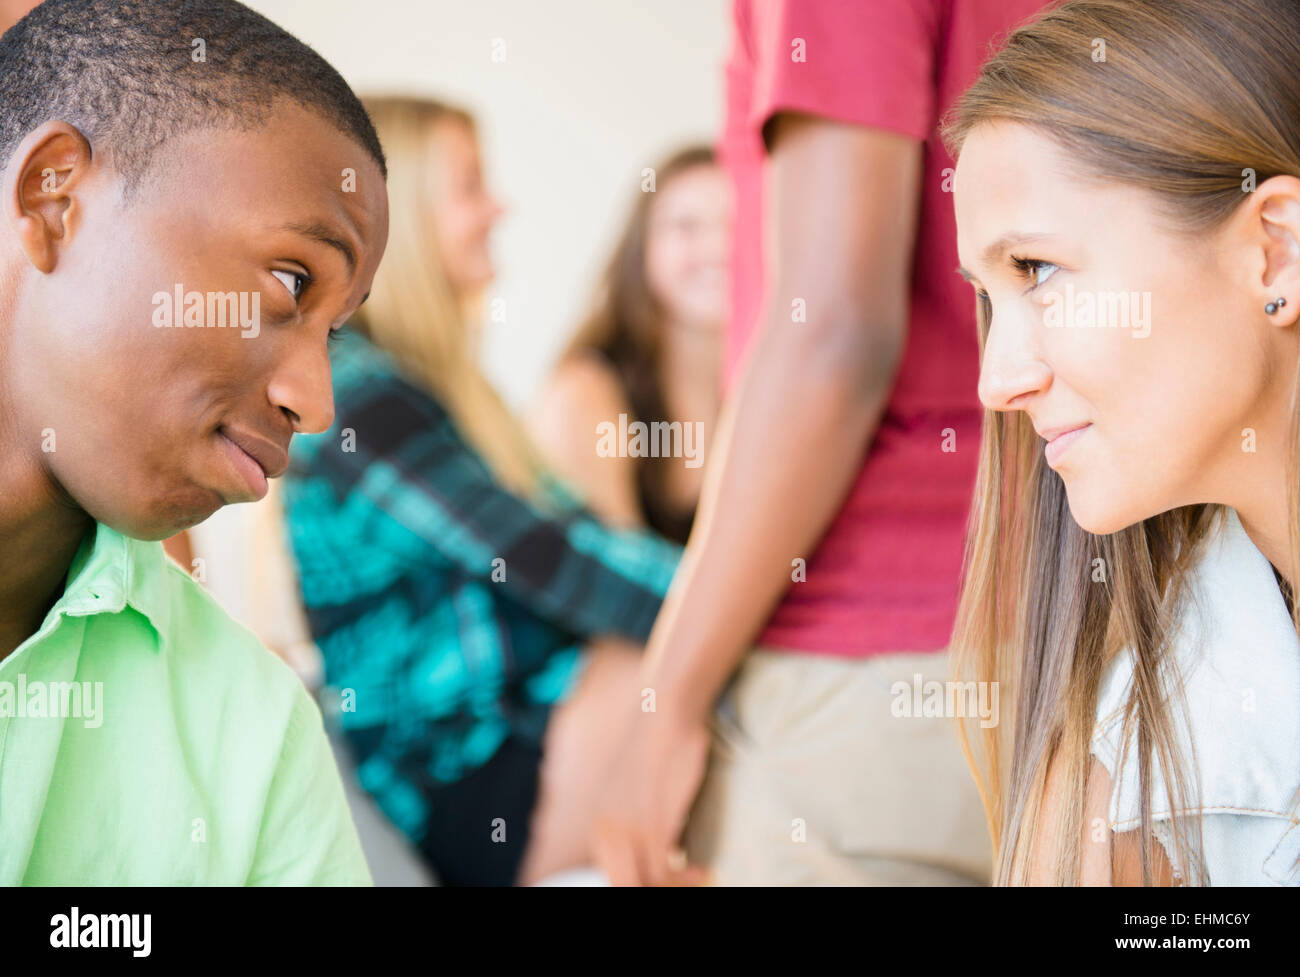 Teenagers face to face at party Stock Photo